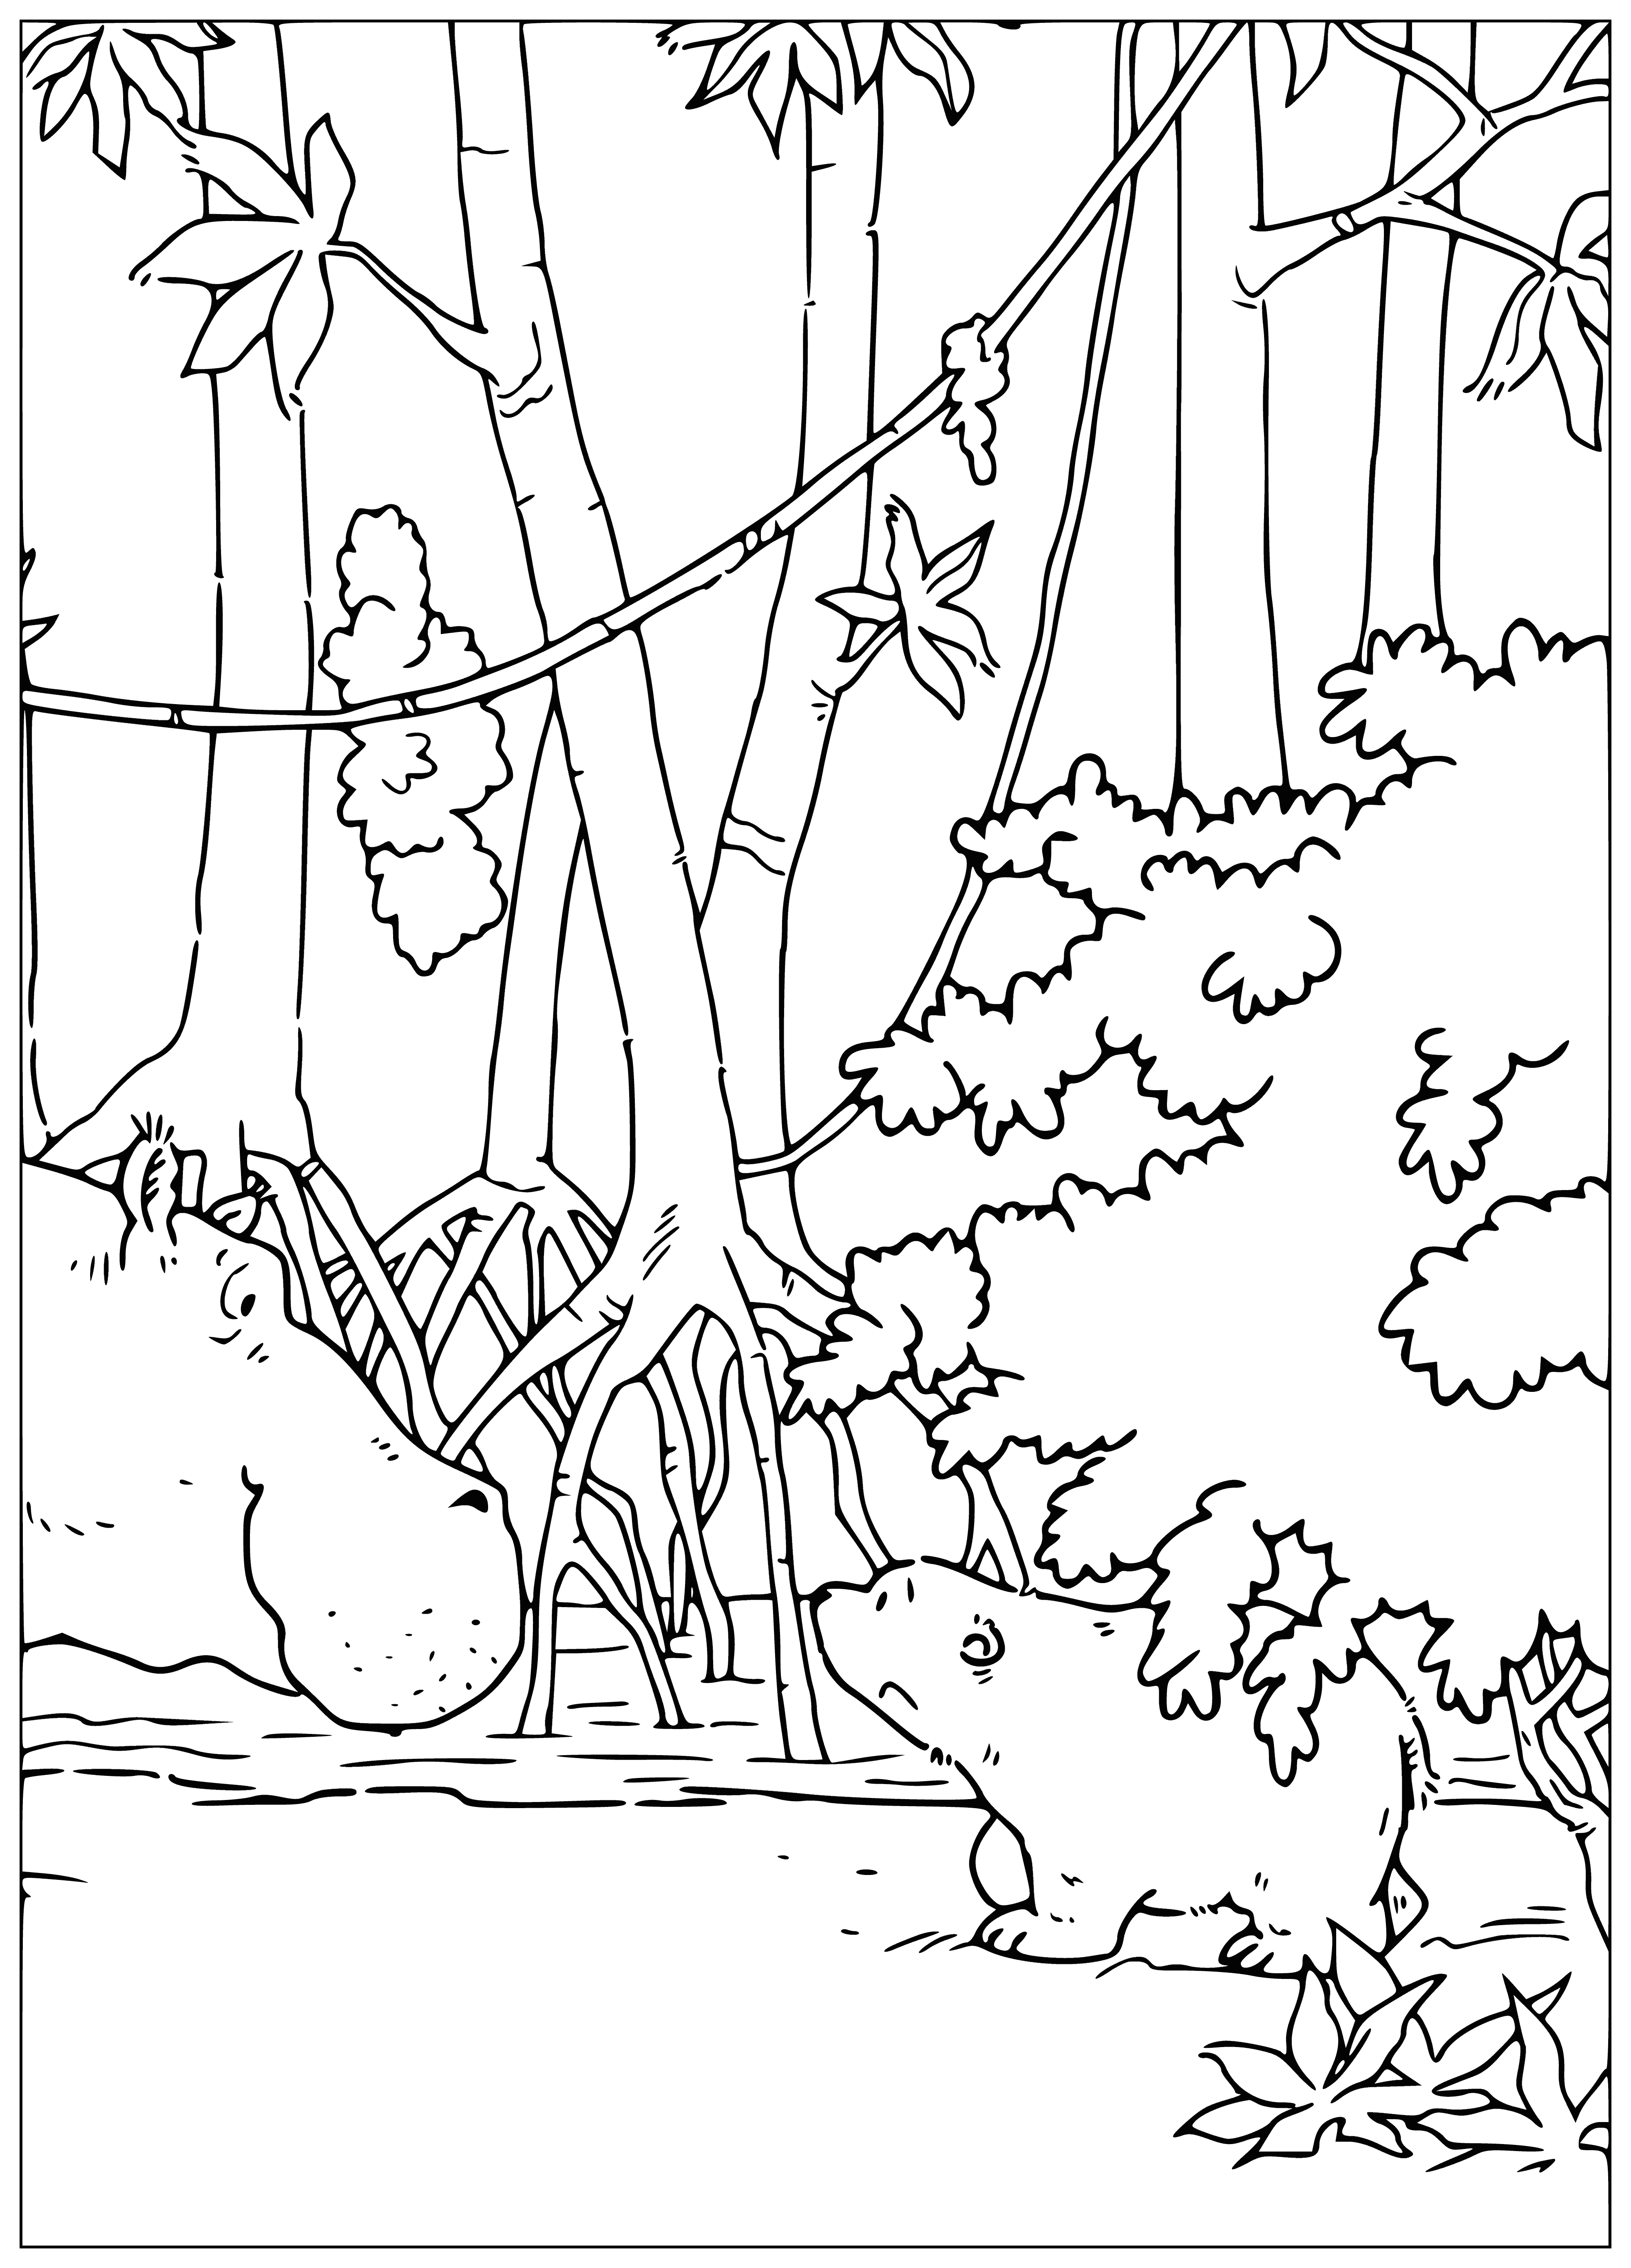 Lars and the hippo coloring page